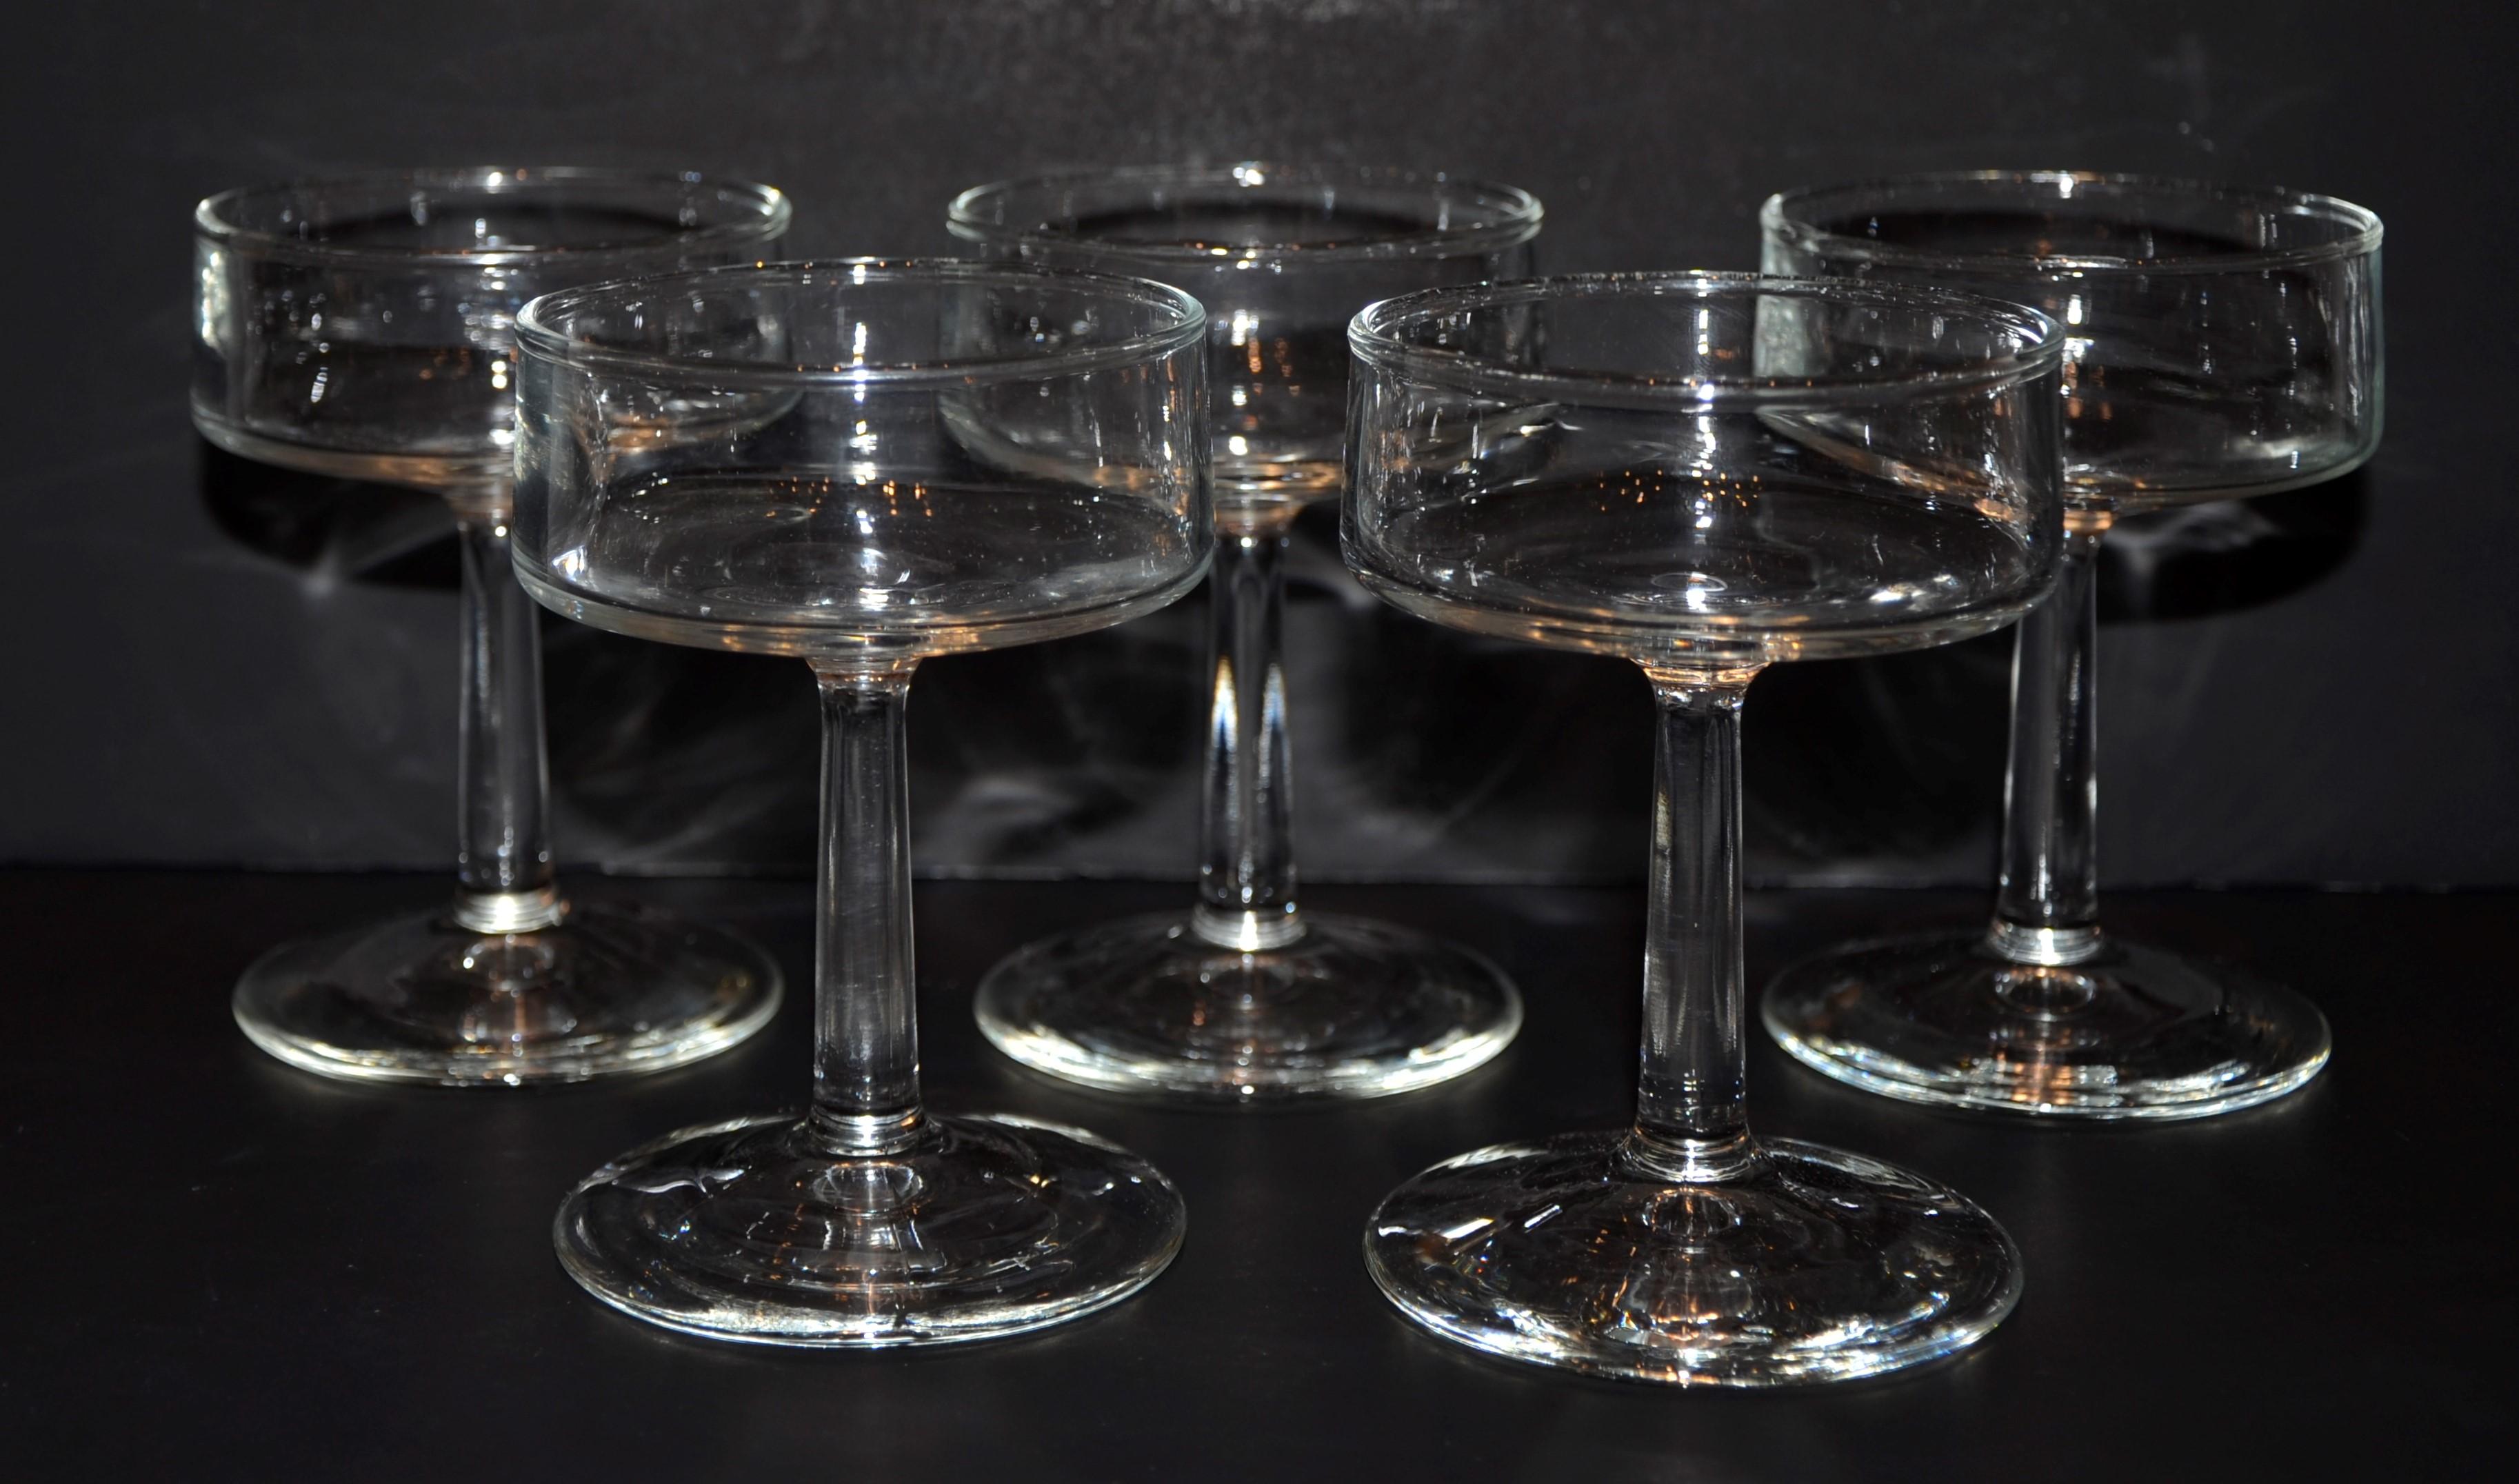 Offered is a set of five Mid-Century Modern petite glass champagne coupes and or sherbet bowls with stems. The size and design would indicate that the style of the champagne coupes are post Art Deco and early Mid-Century Modern. The glass champagne